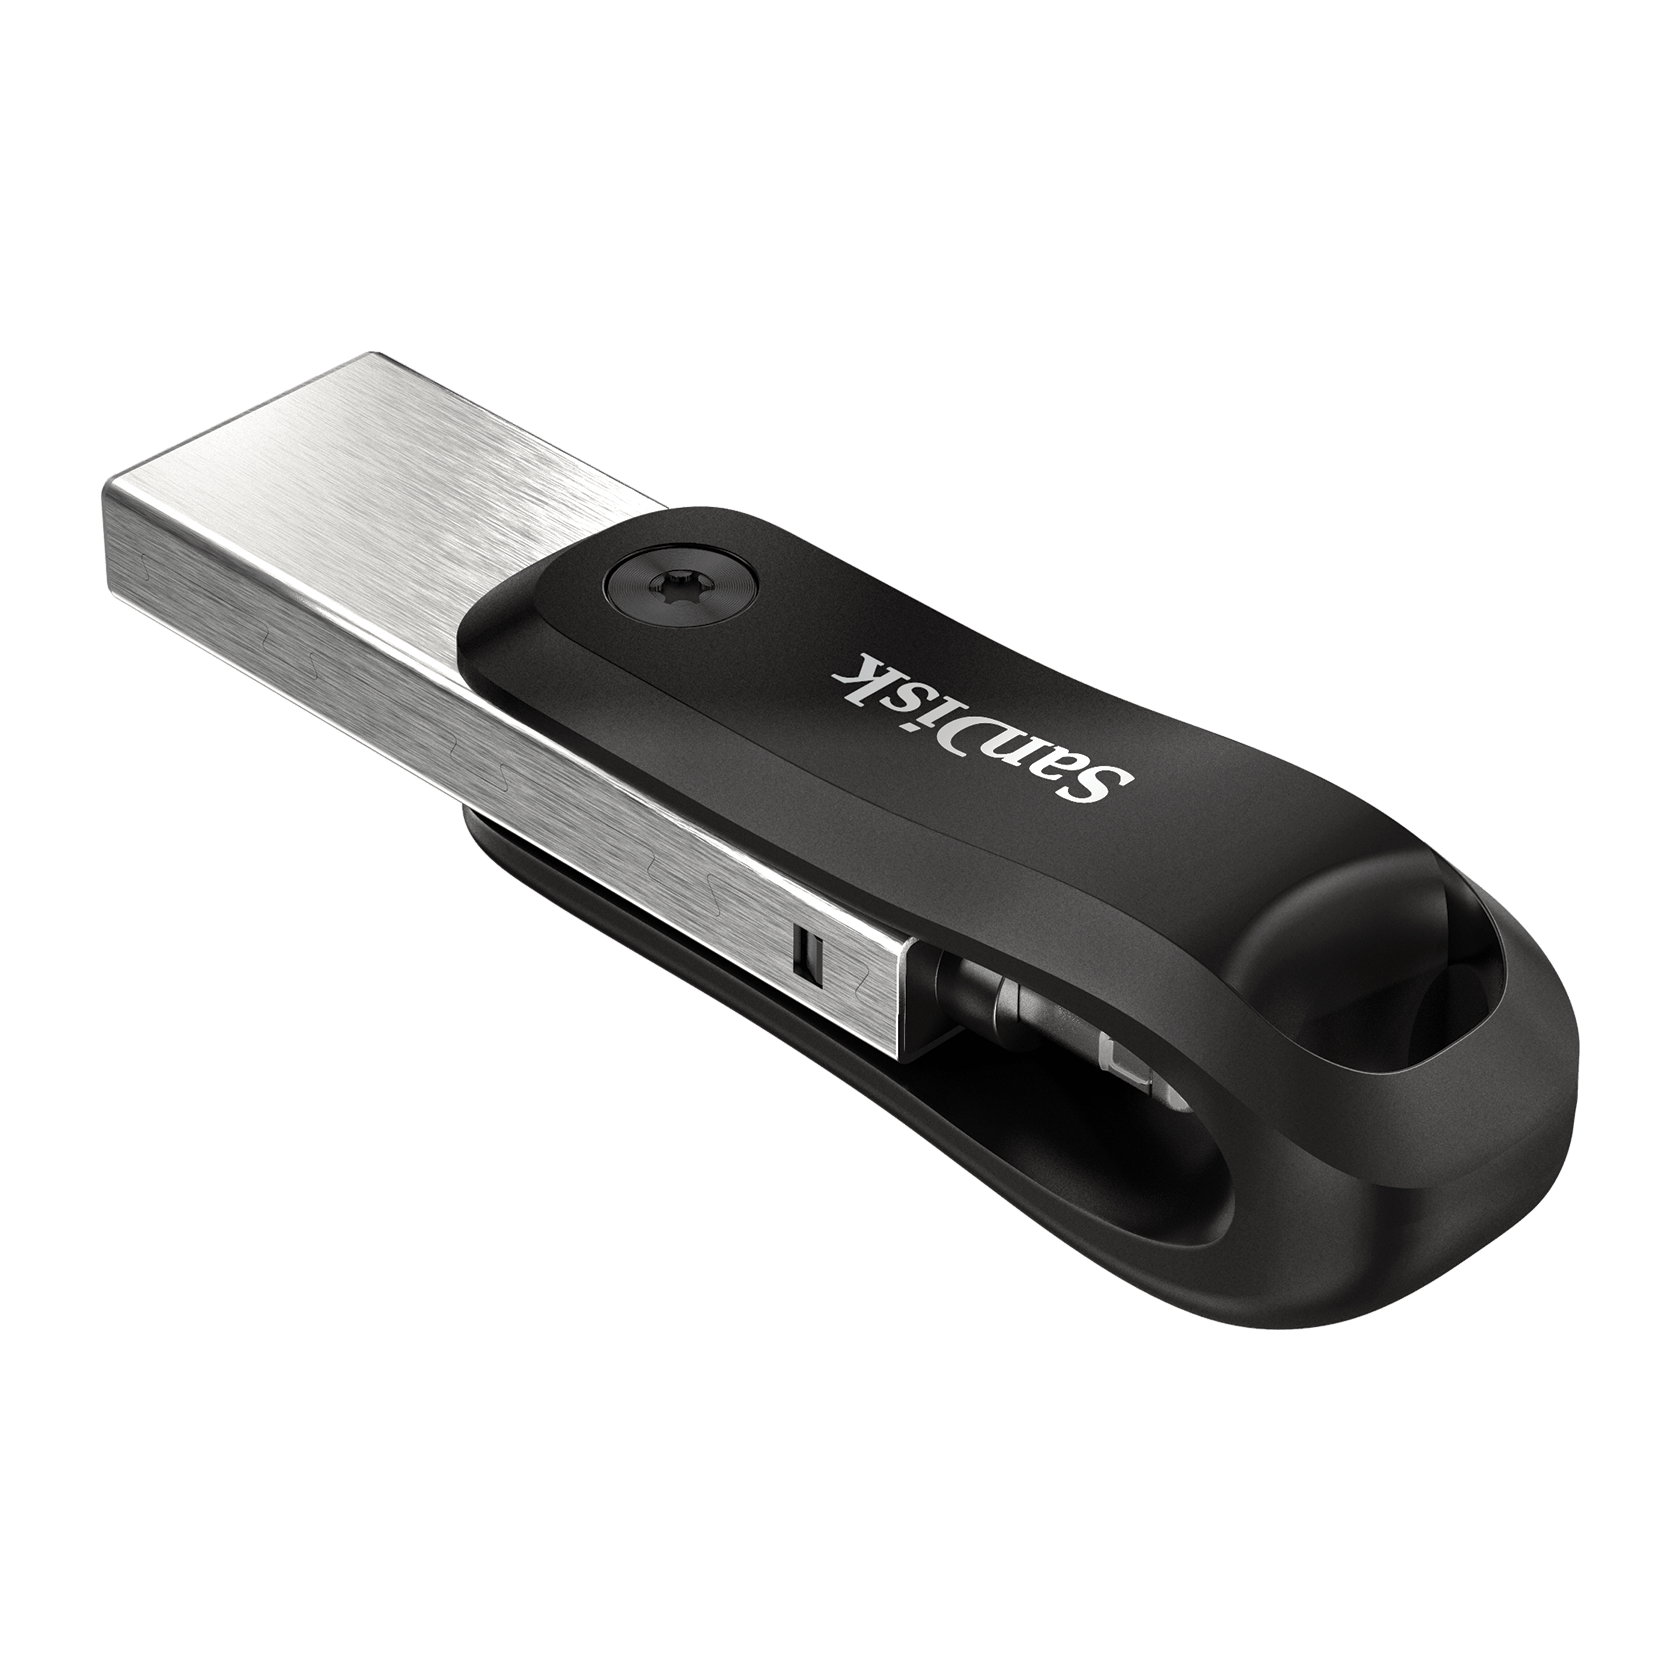 SanDisk 256GB iXpand Flash Drive Go, for iPhone and iPad - SDIX60N-256G-GN6NE - image 5 of 8